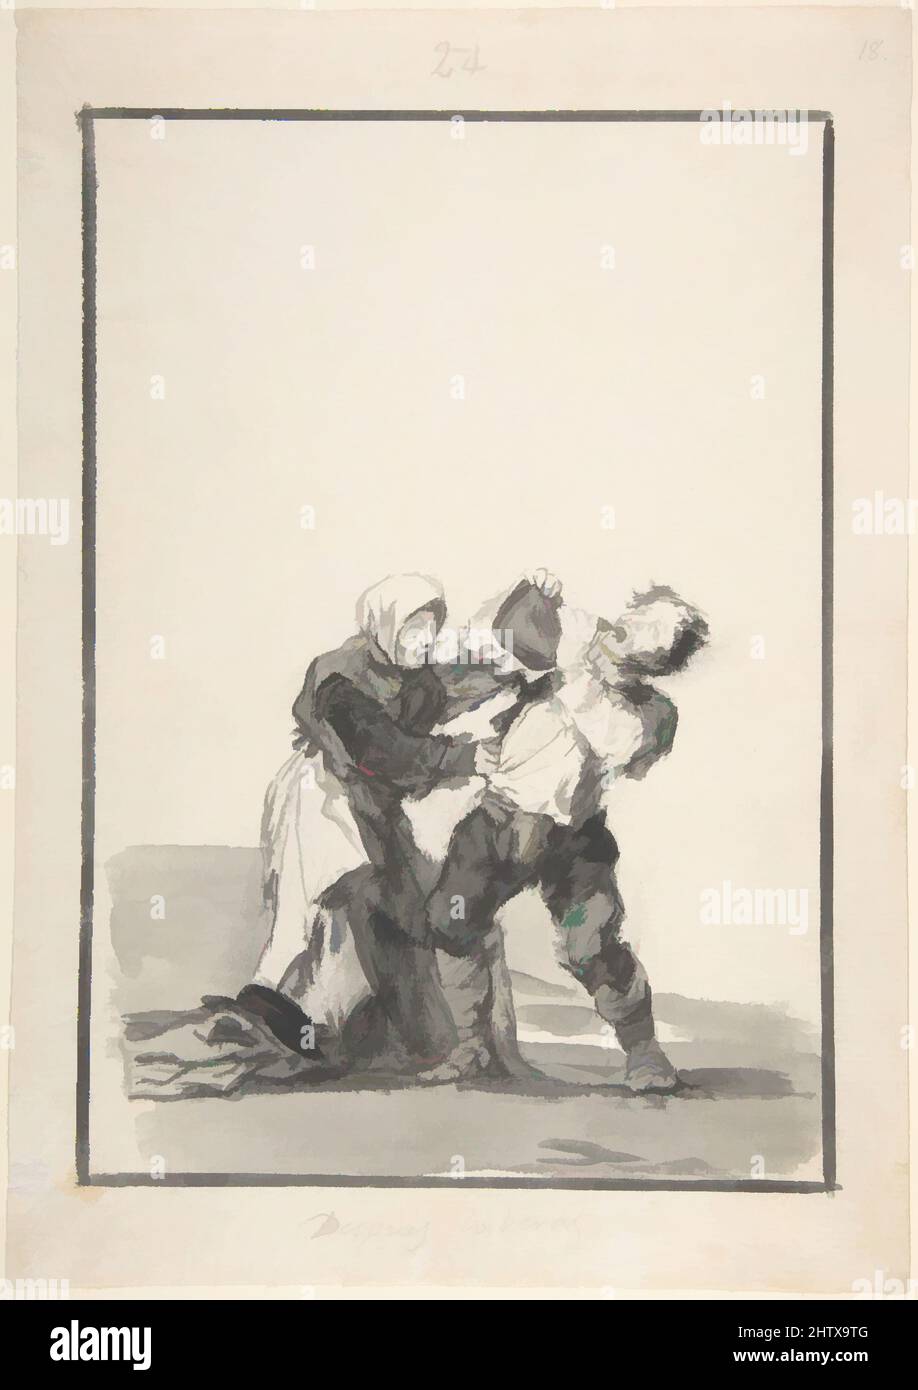 Art inspired by You'll See Later, 1806–17, Brush with black and gray wash on laid paper, Overall: 10 1/2 x 7 3/8 in. (26.7 x 18.8 cm), Drawings, Goya (Francisco de Goya y Lucientes) (Spanish, Fuendetodos 1746–1828 Bordeaux, Classic works modernized by Artotop with a splash of modernity. Shapes, color and value, eye-catching visual impact on art. Emotions through freedom of artworks in a contemporary way. A timeless message pursuing a wildly creative new direction. Artists turning to the digital medium and creating the Artotop NFT Stock Photo